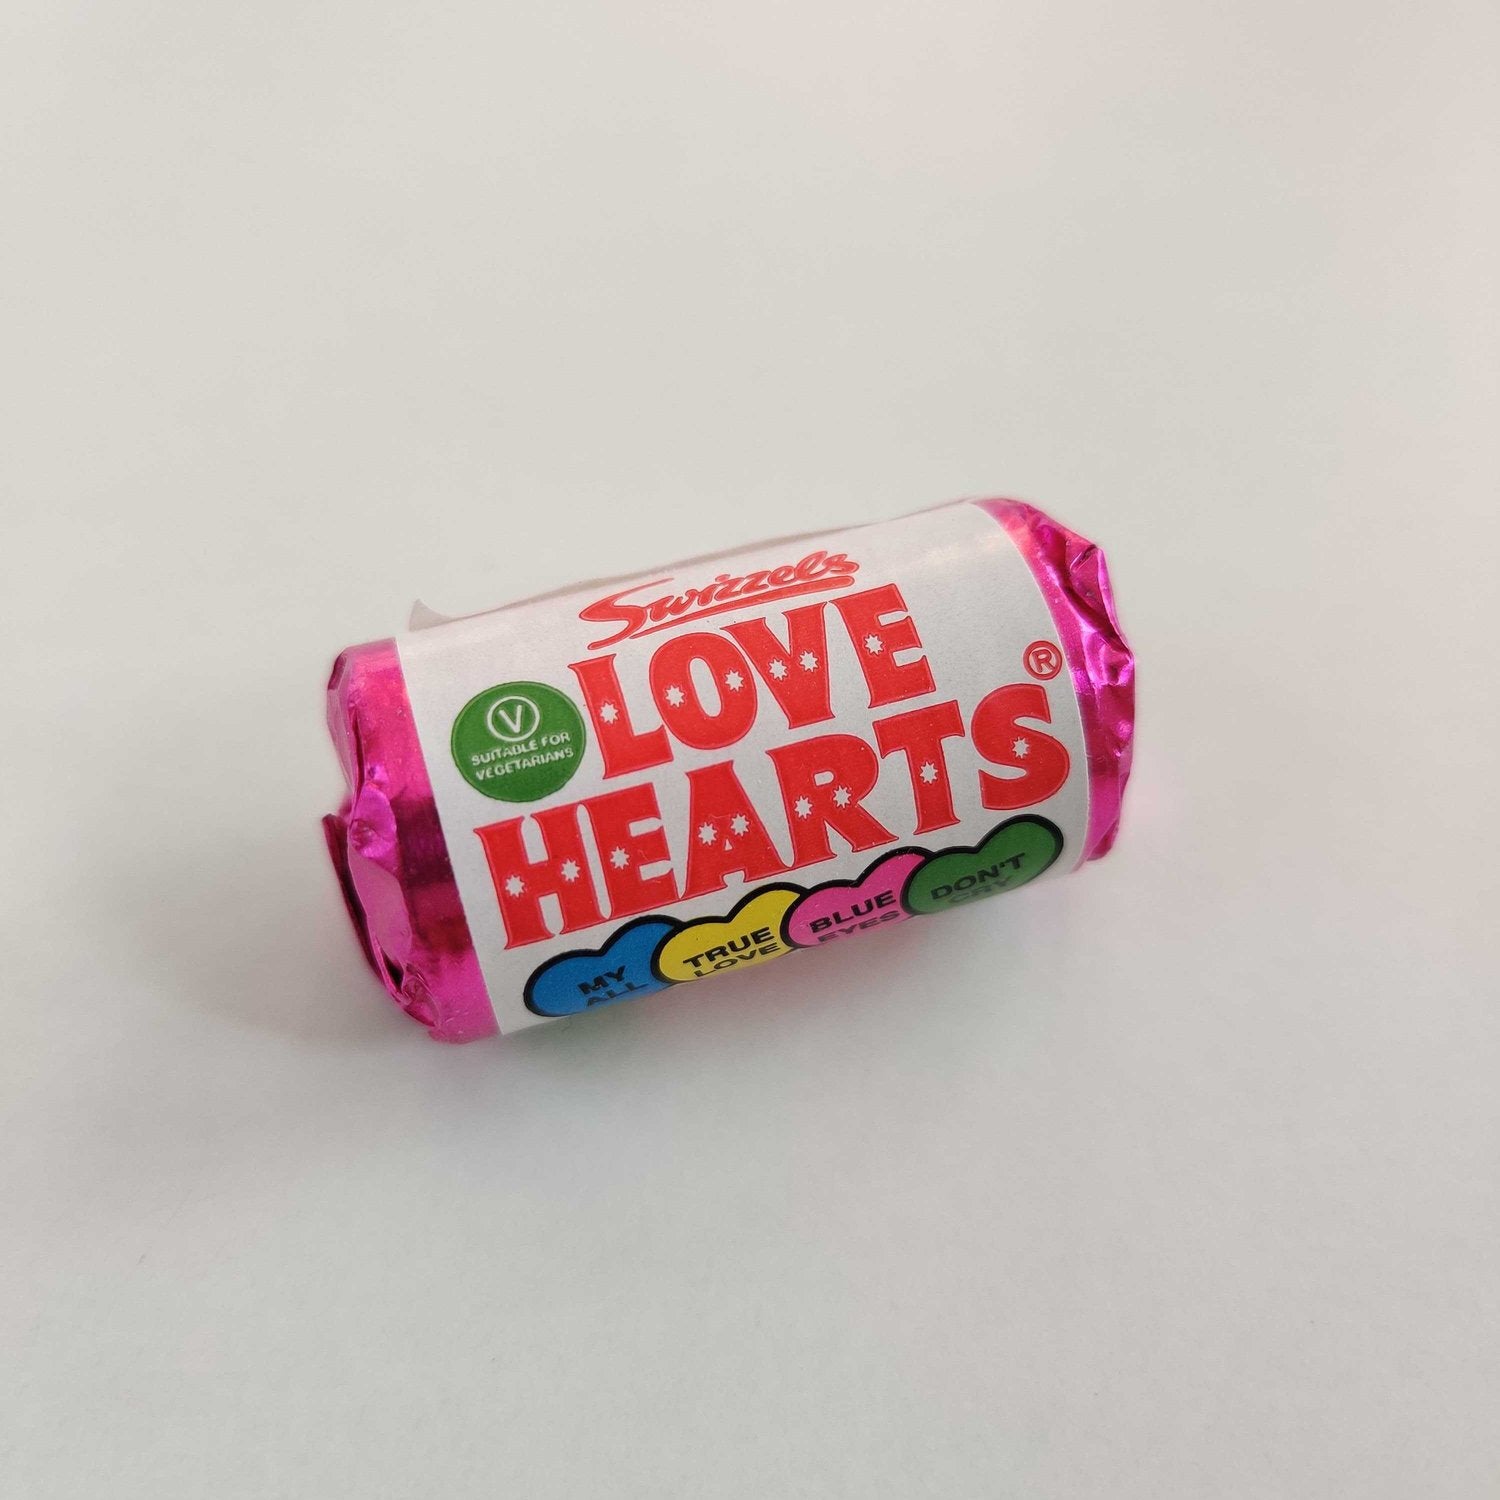 Love hearts - Retro sweets - BearHugs - Thinking of you letterbox hug in a box gift